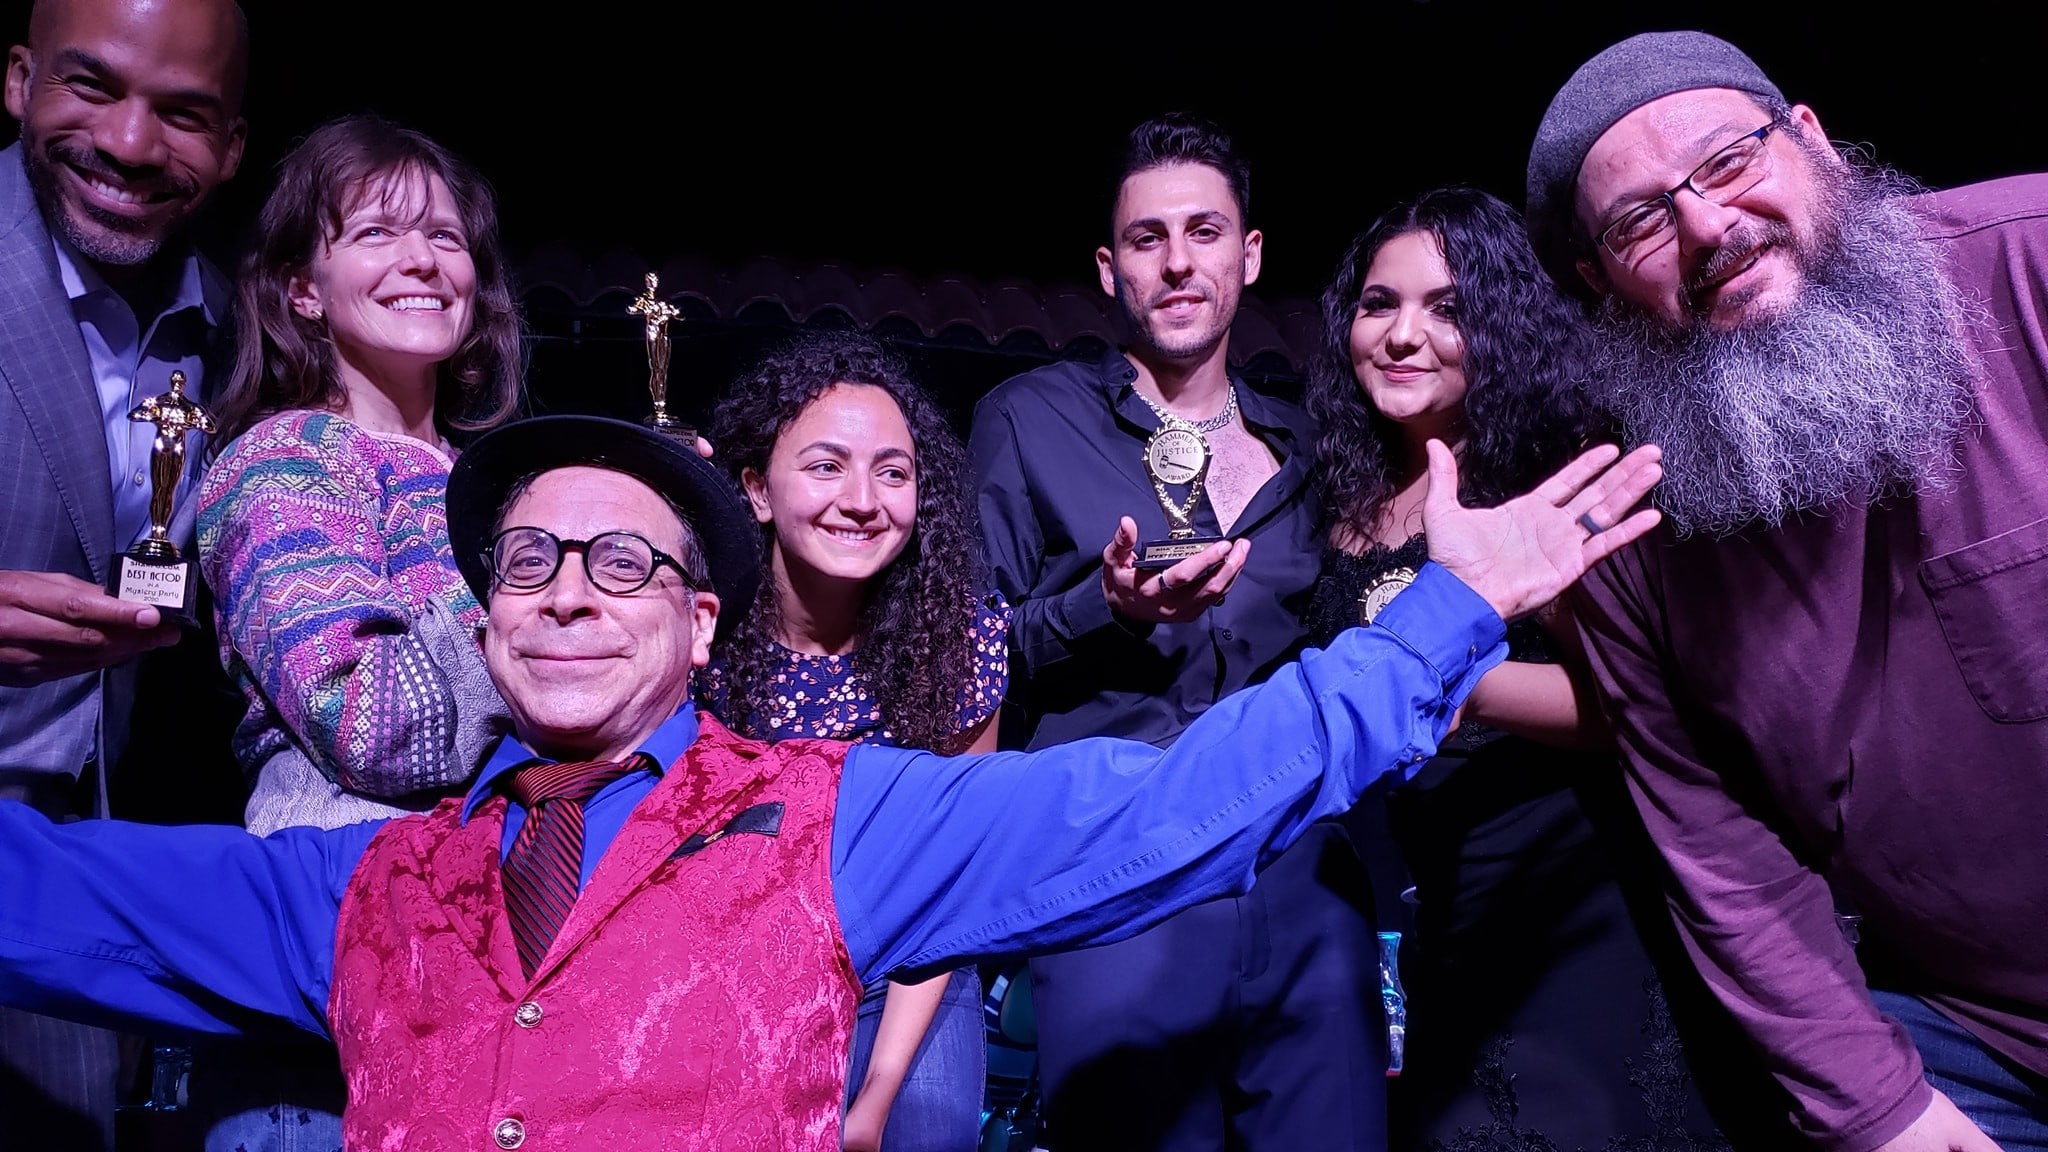 Sharpo!® on stage at EL Cid with Mystery Show Winners and other performers.